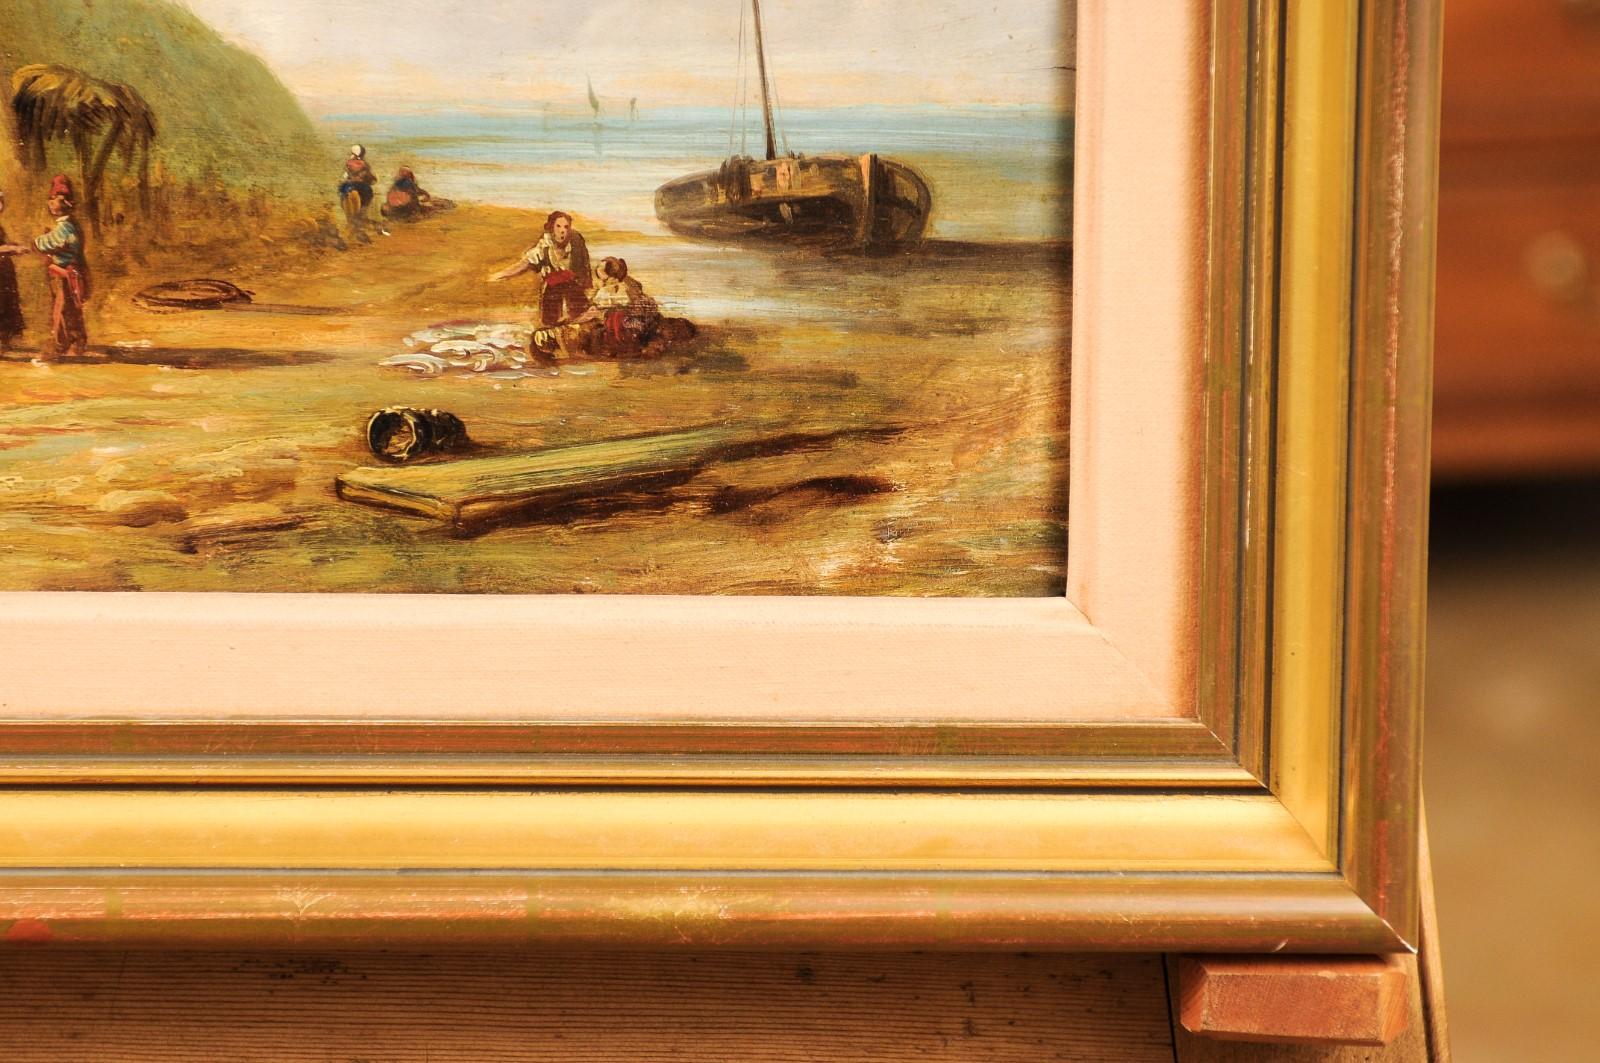 Wood French 19th Century Framed Oil On Panel Painting Depicting a Village by the Sea For Sale